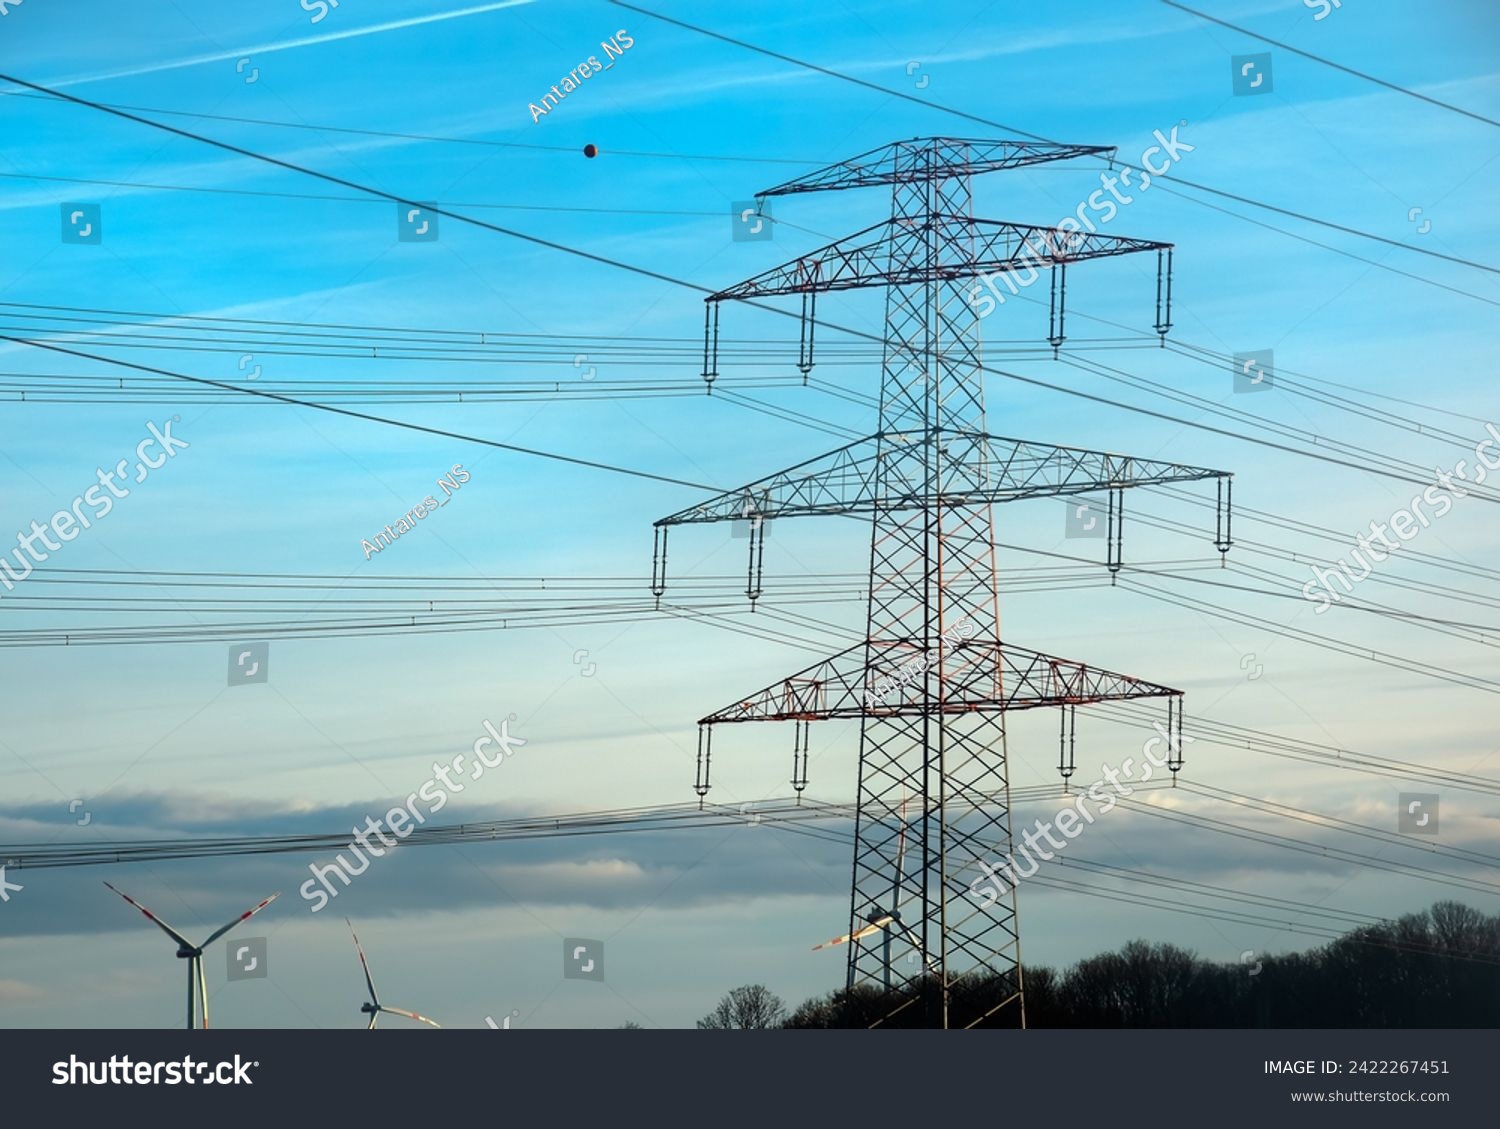 High voltage power lines along a road in Austria. #2422267451